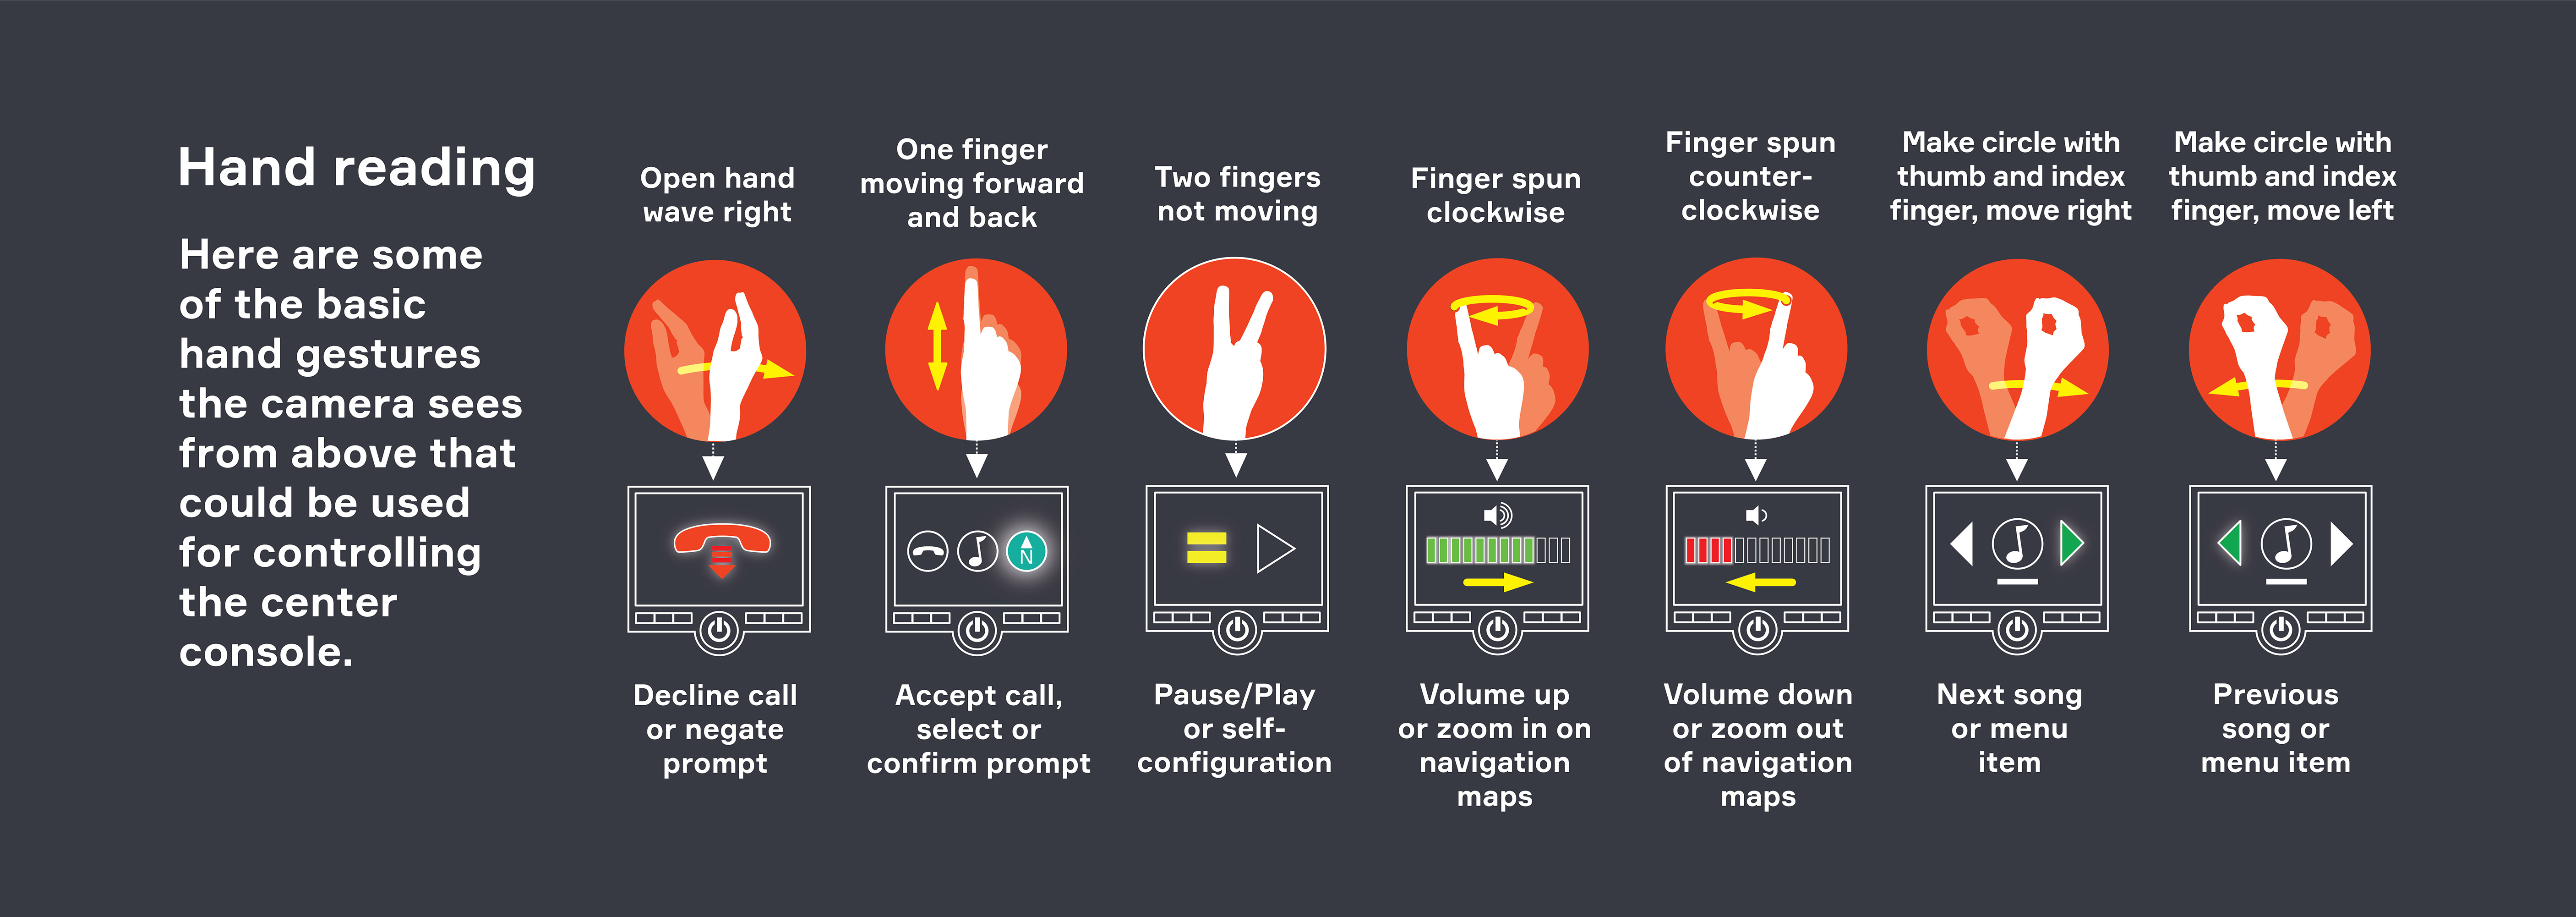 Gesture Control Hand Reading